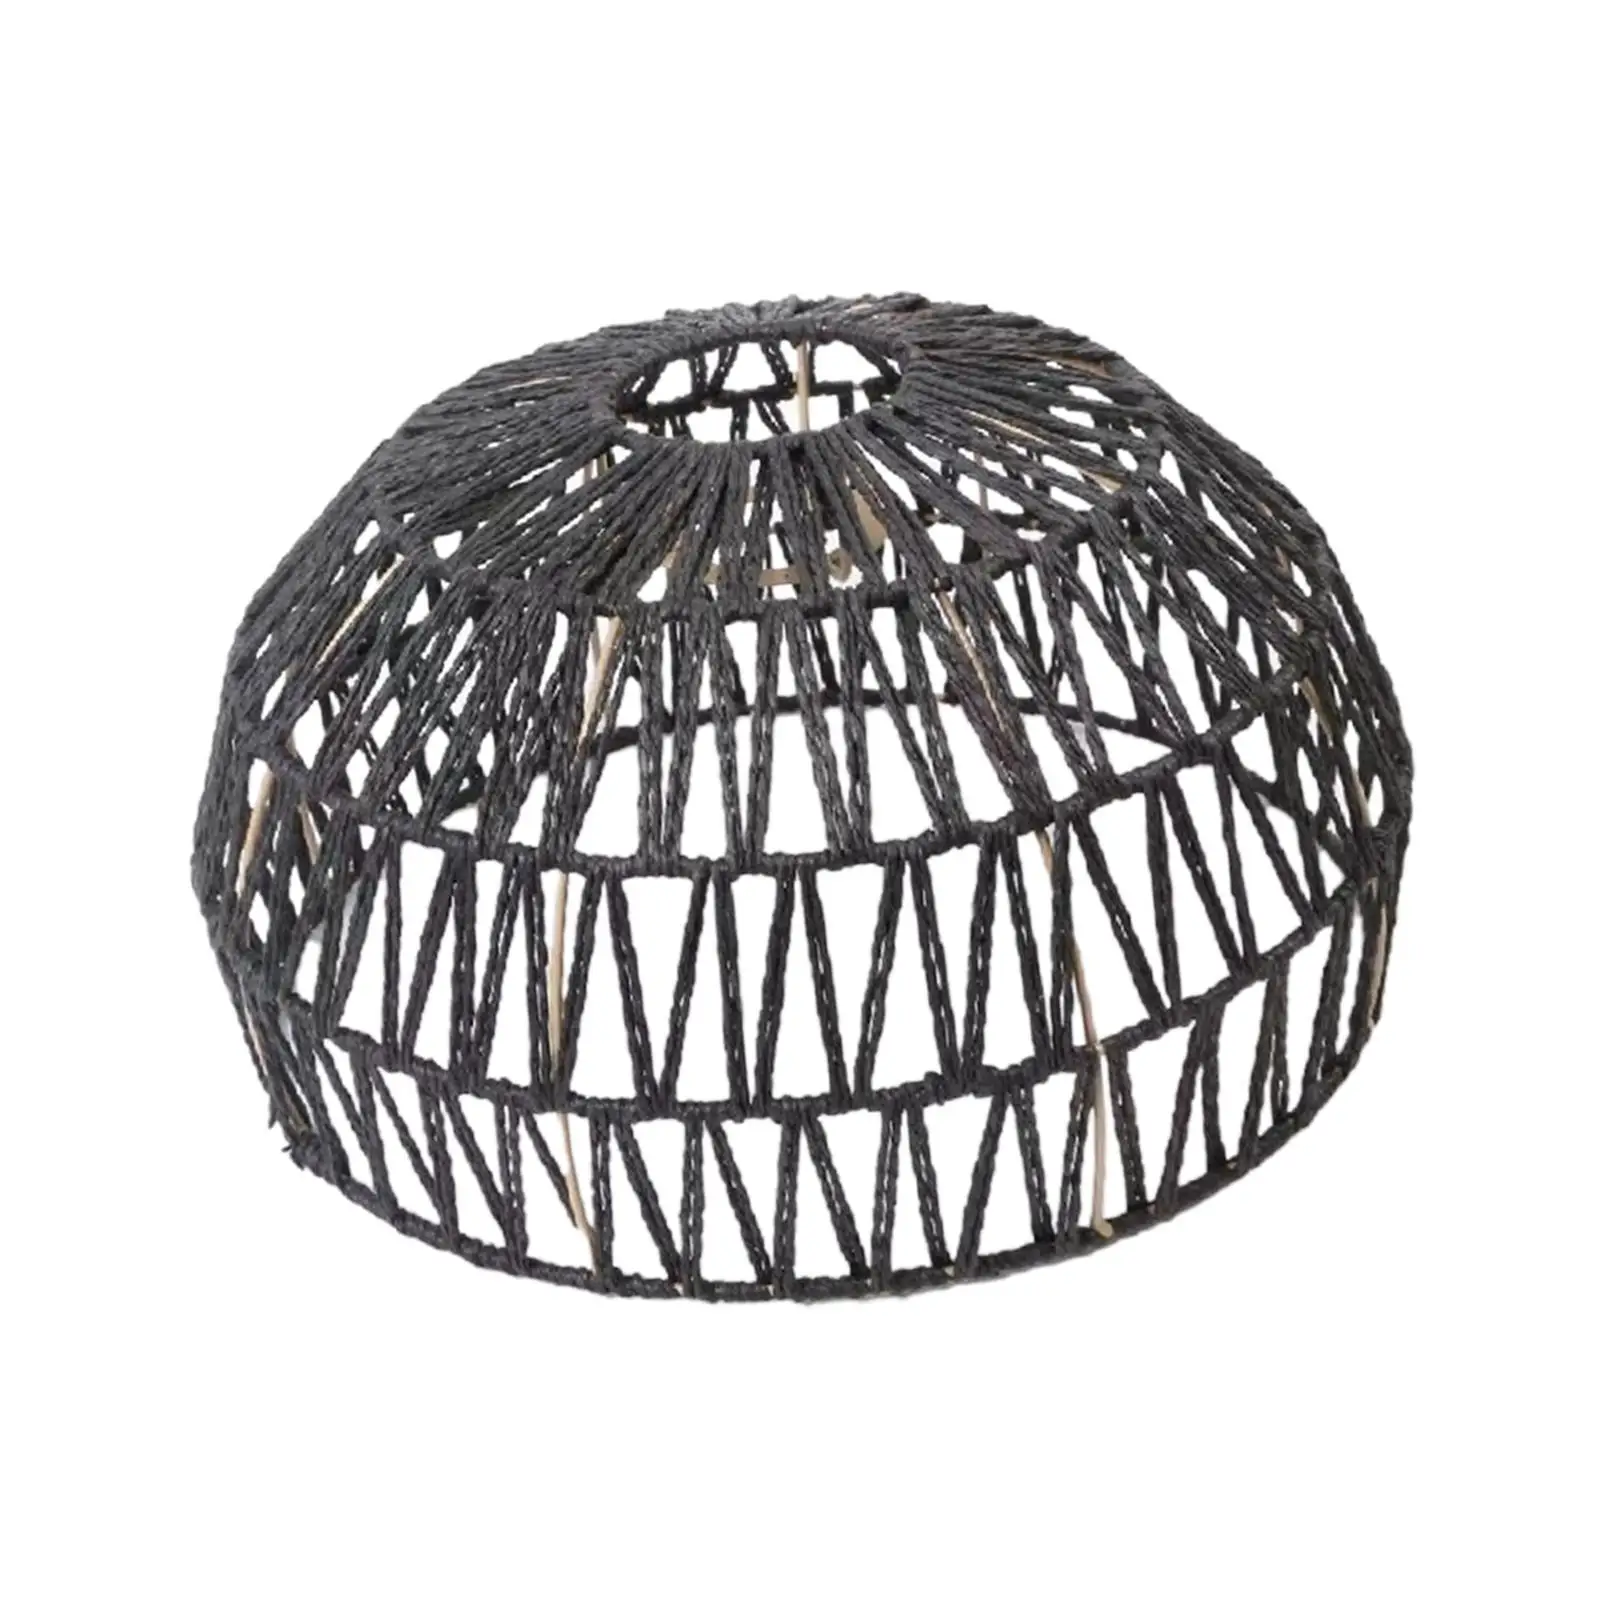 Boho Pendant Lamp Shade Decor Woven Paper Rope Ceiling Light Shade Fixture Chandelier Cover for Bedroom Cafe Kitchen Hotel